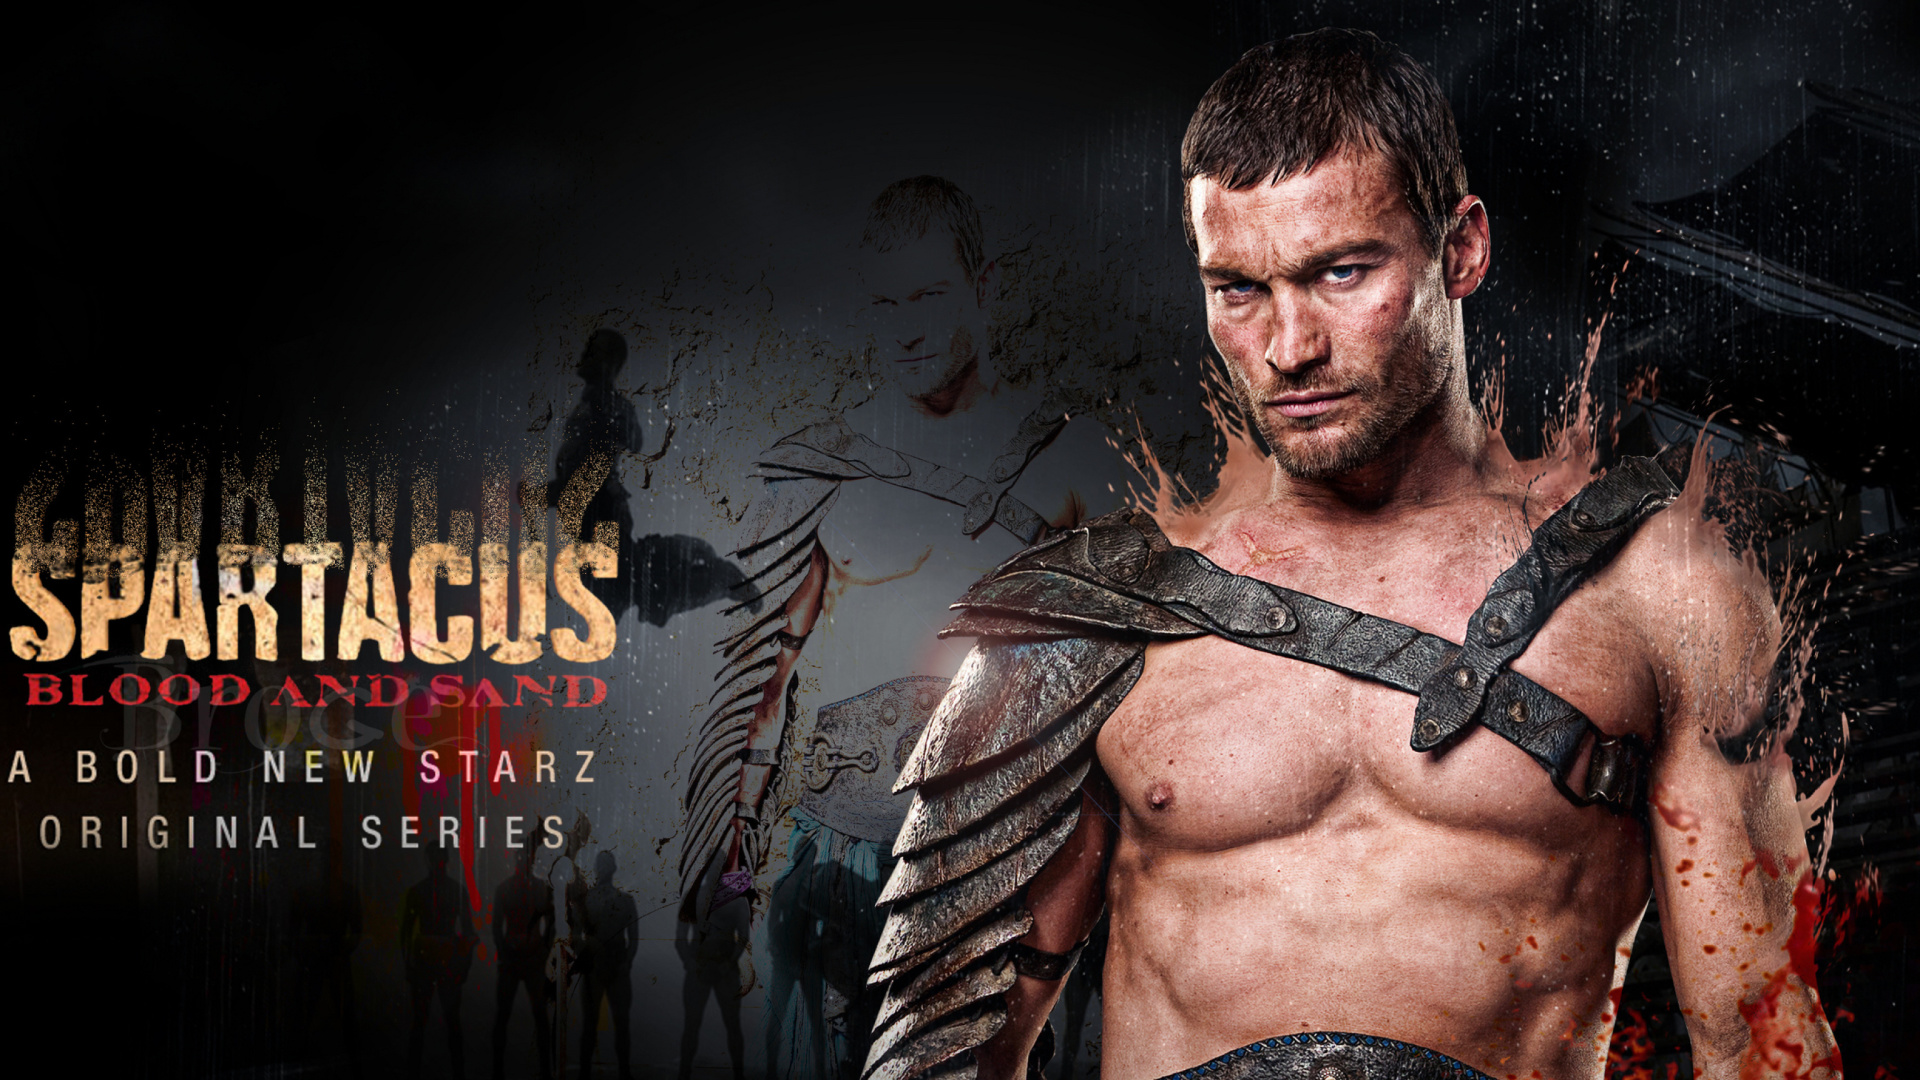 Sfondi Spartacus War of the Damned 1920x1080